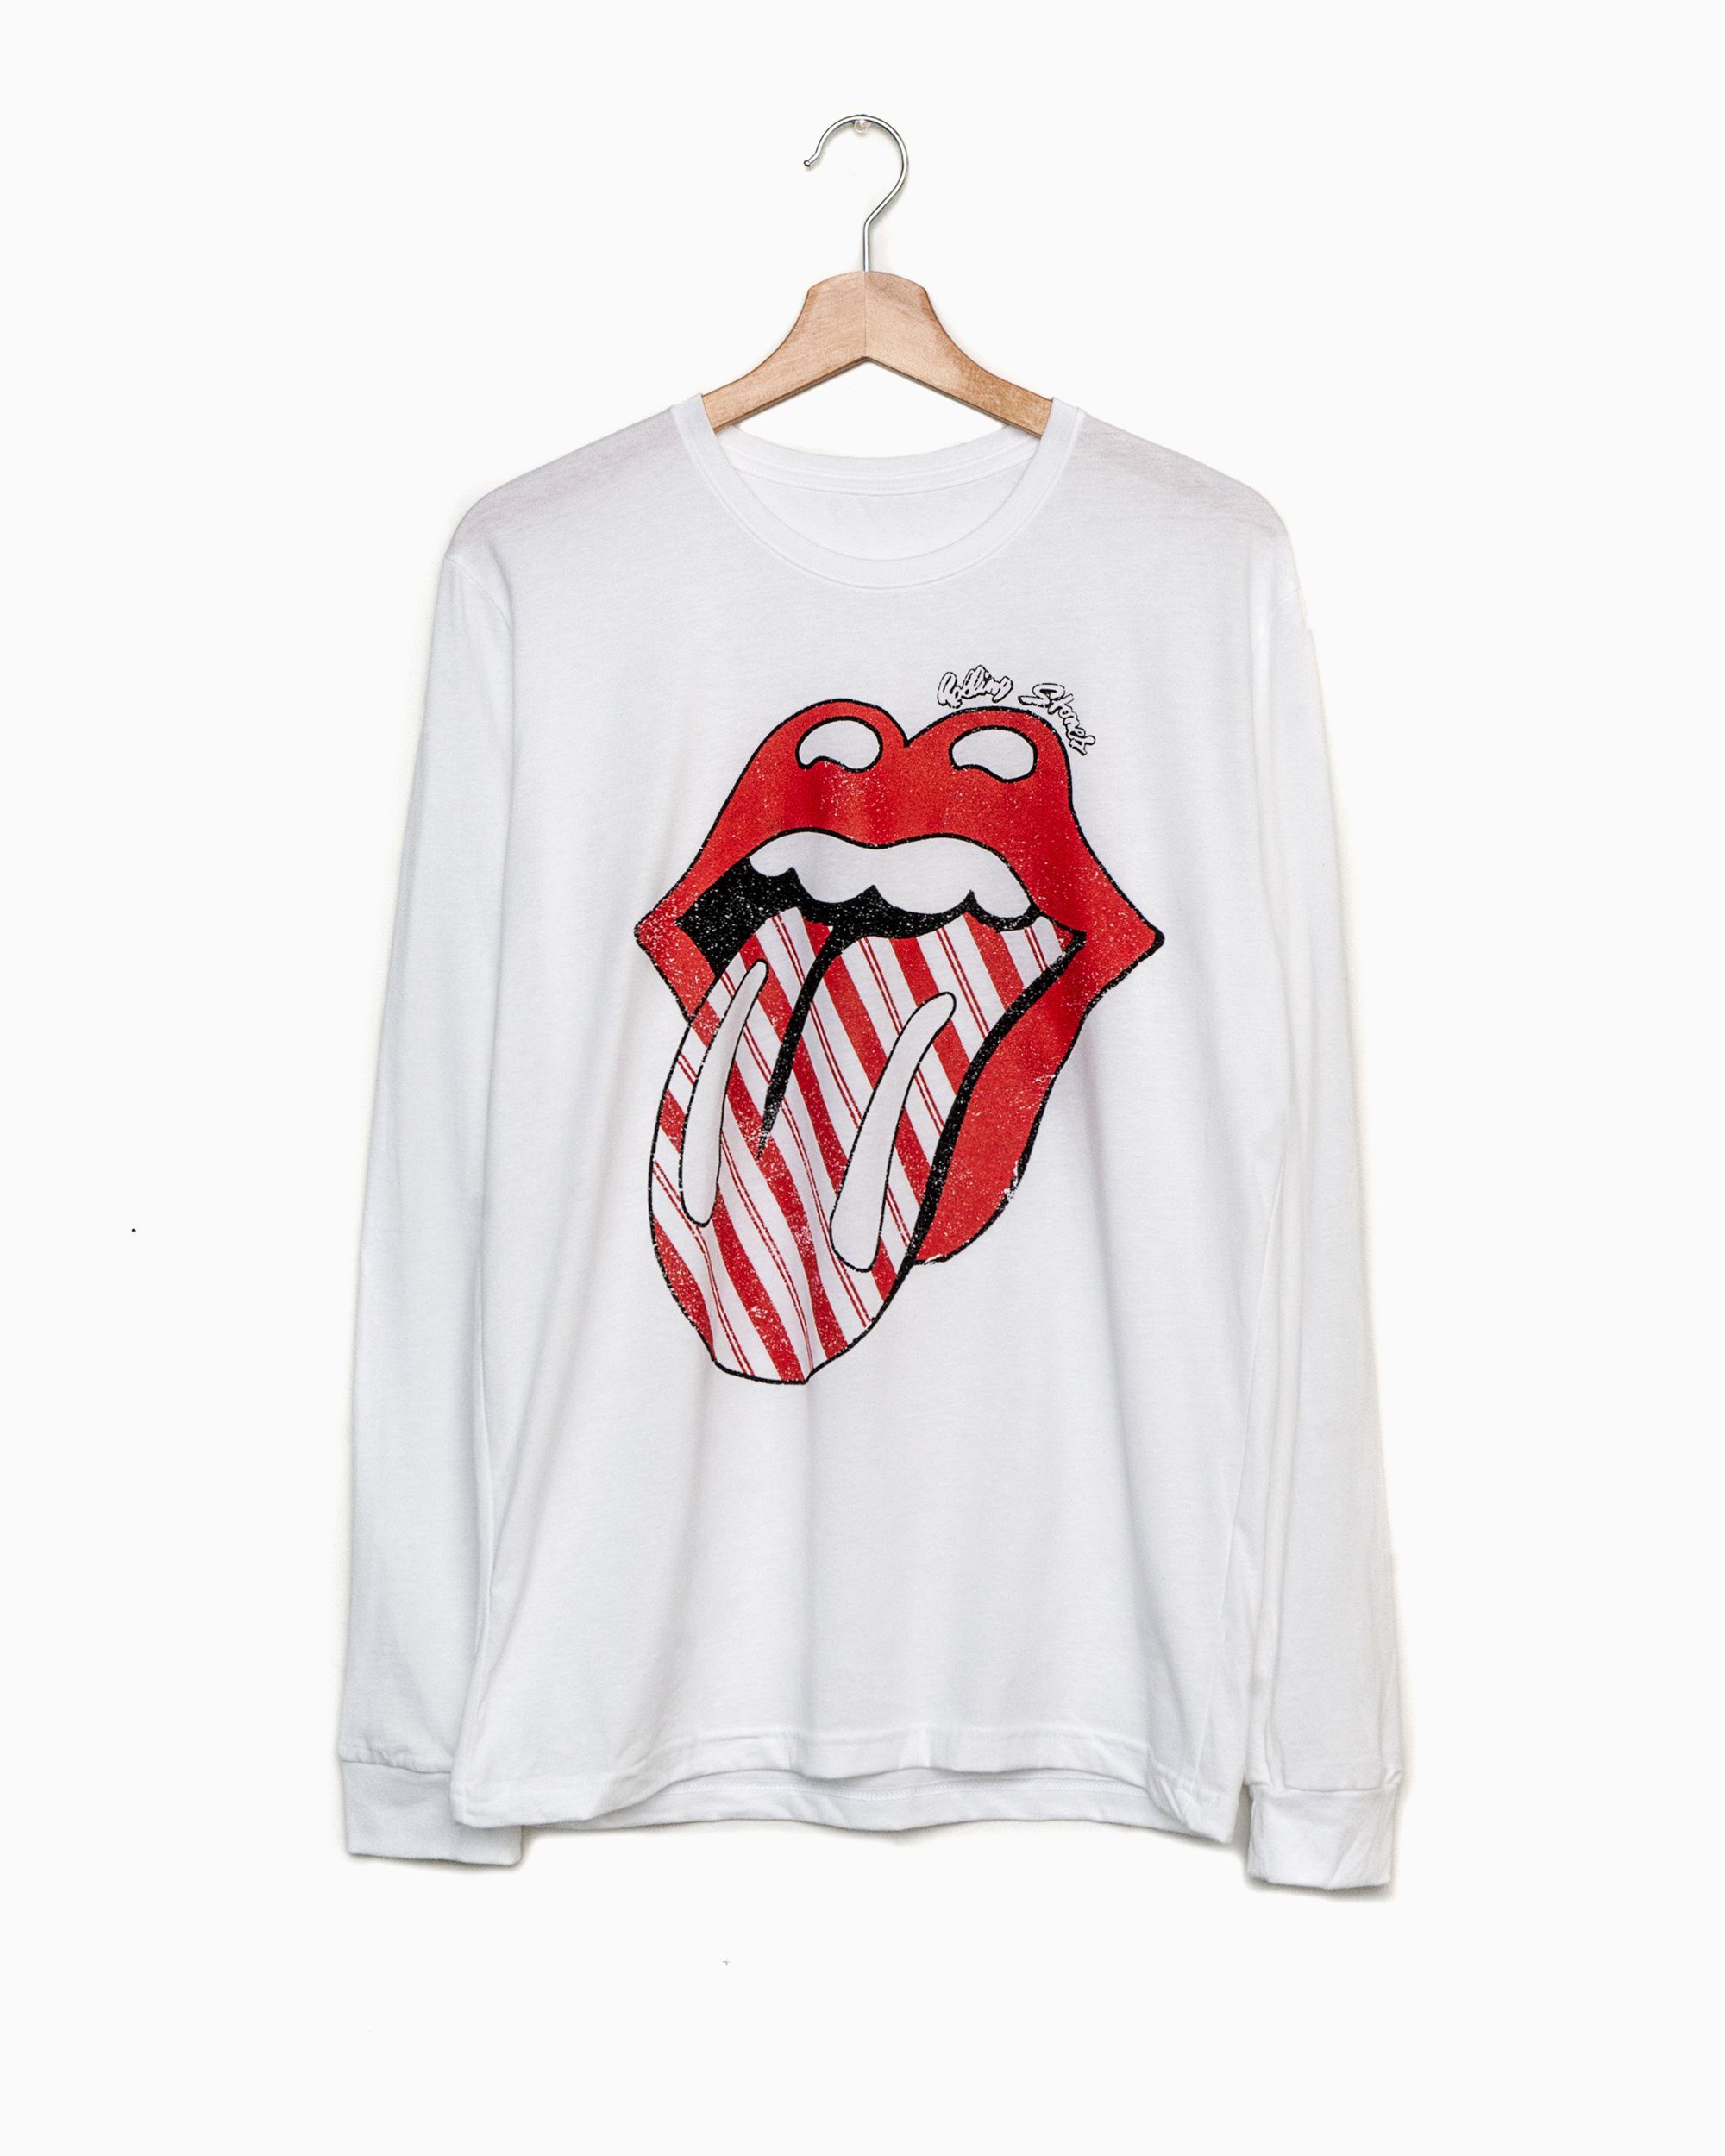 Rolling Stones Candy Cane Lick White Long Sleeve Tee - shoplivylu